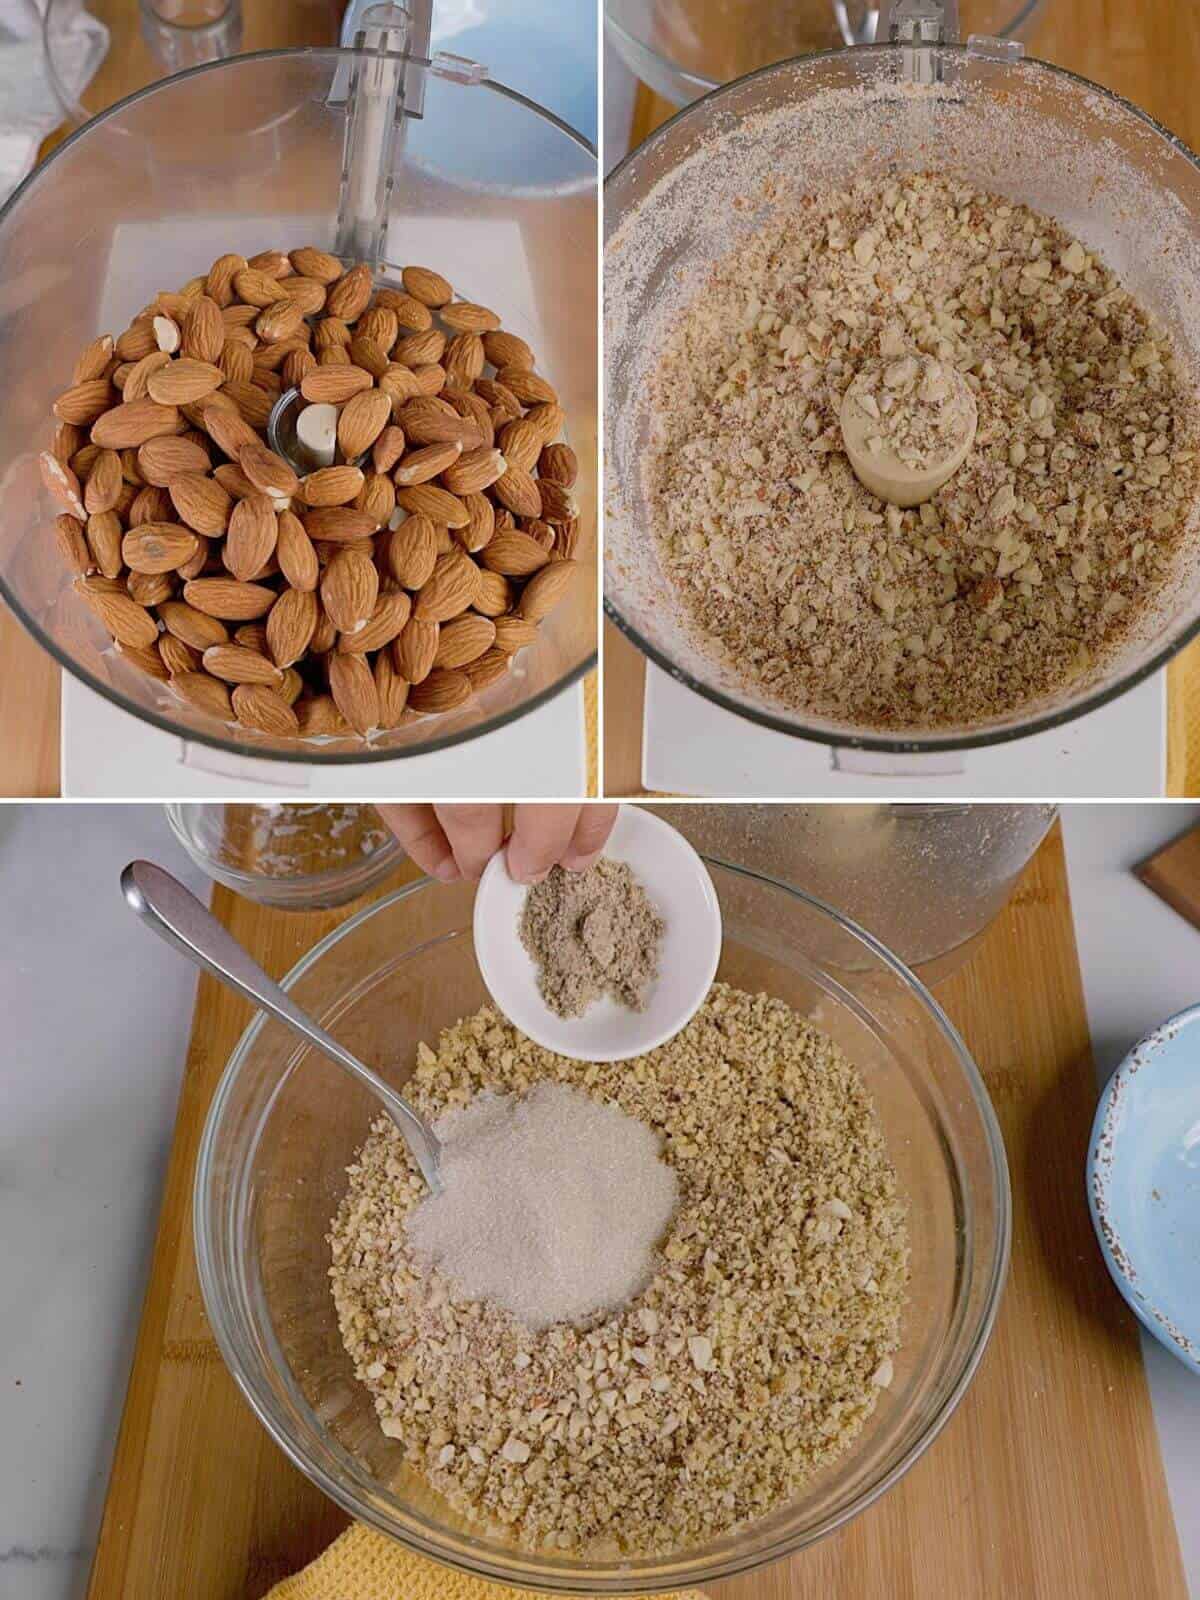 Nuts being processed and combined to make nut filling.